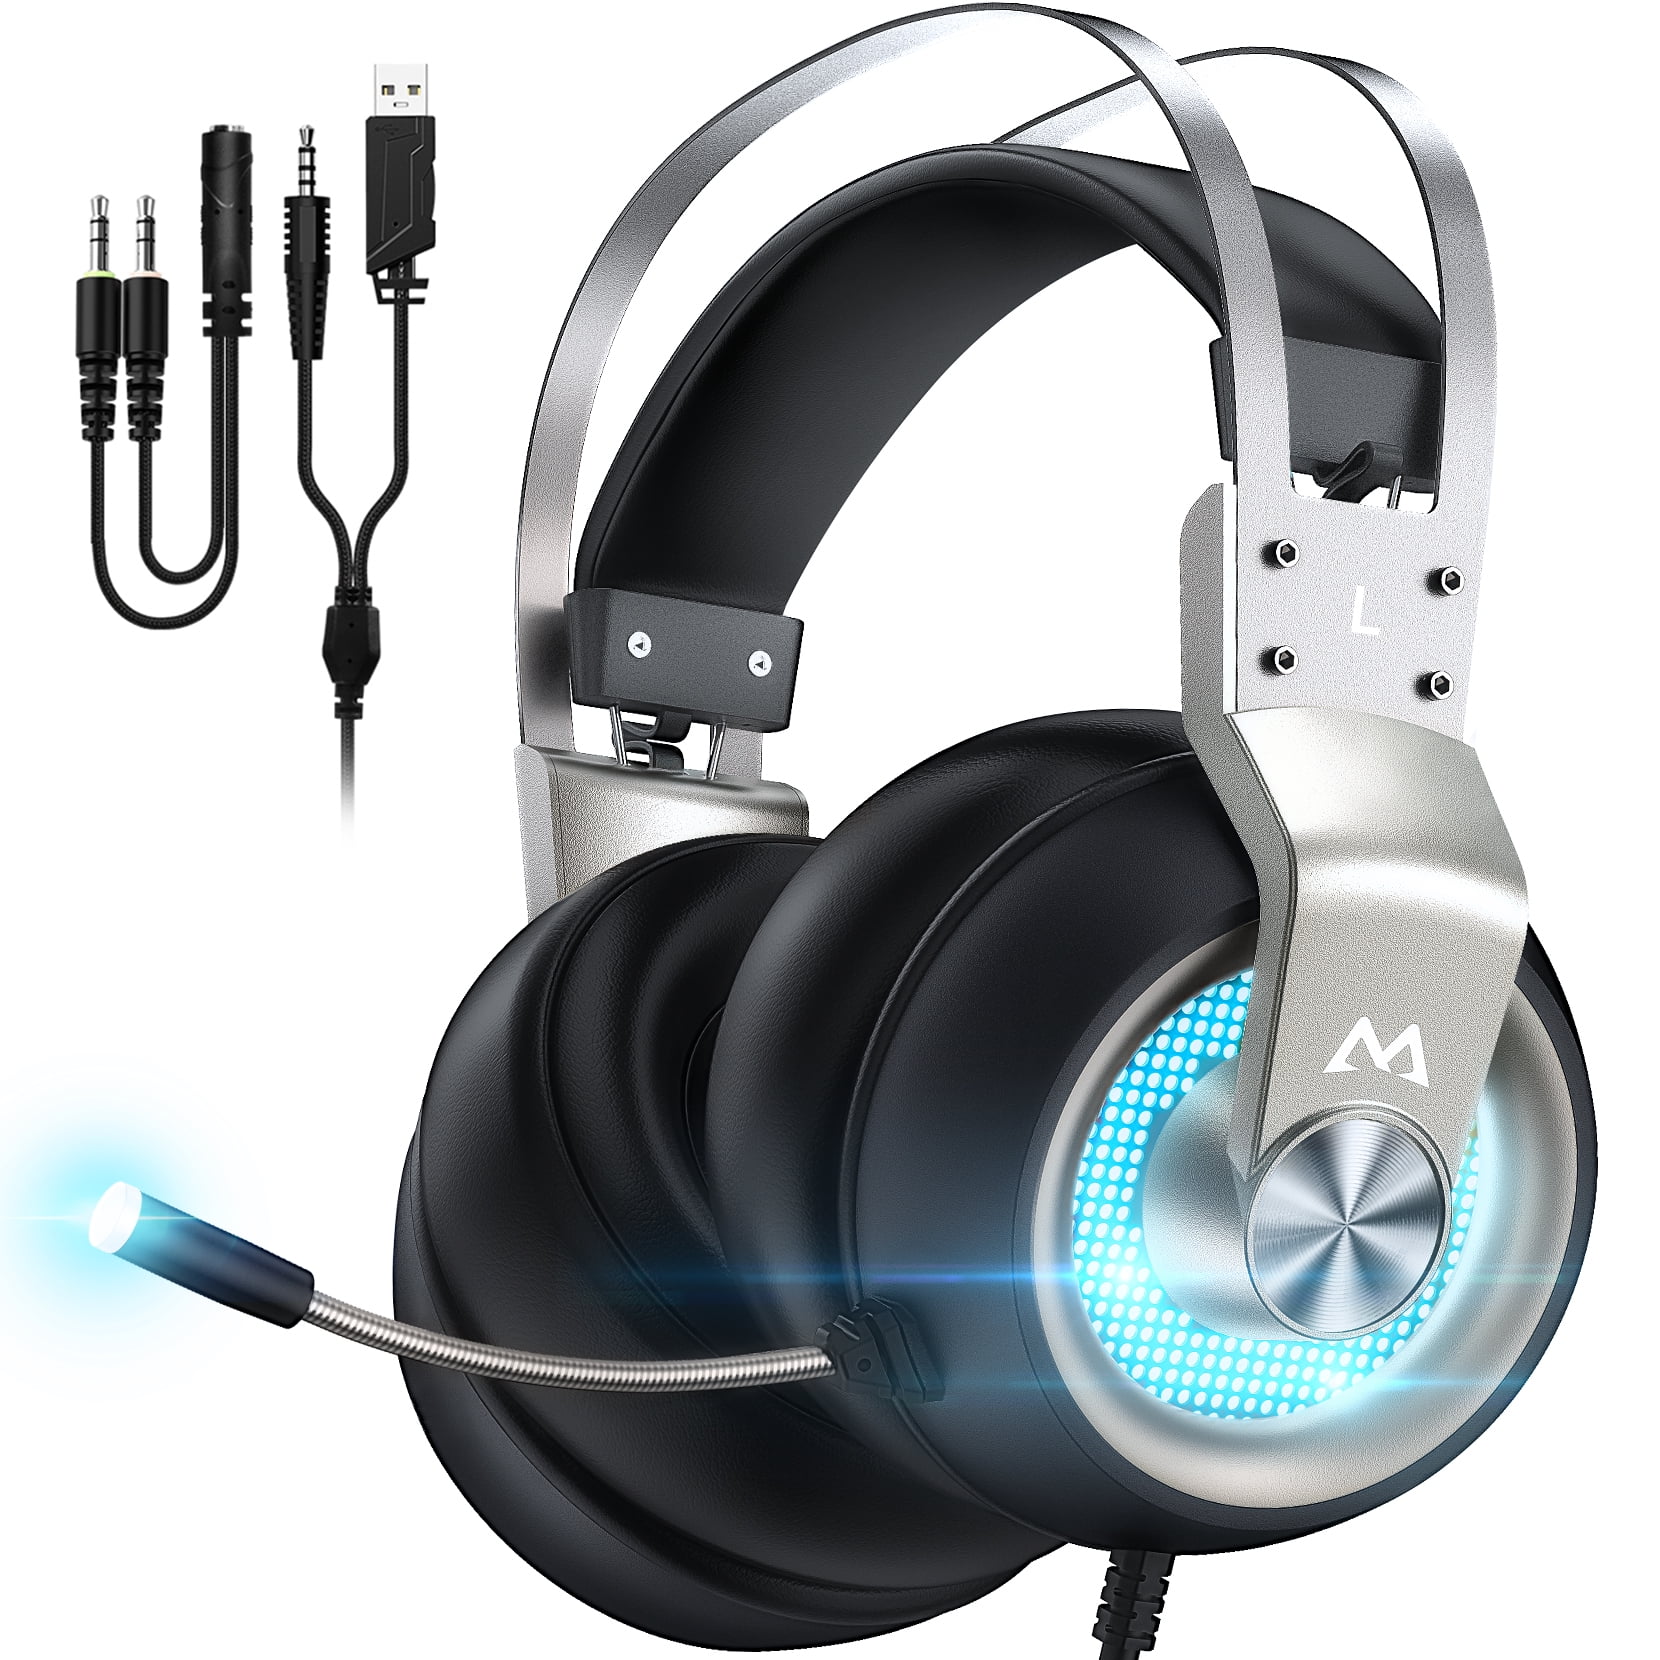 Black+Green PS4 and so on- Volume Control 3.5mm Wired Bass Stereo Gaming Headphones with Mic & LED Light for Laptop Computer Cellphone Gaming Headset 